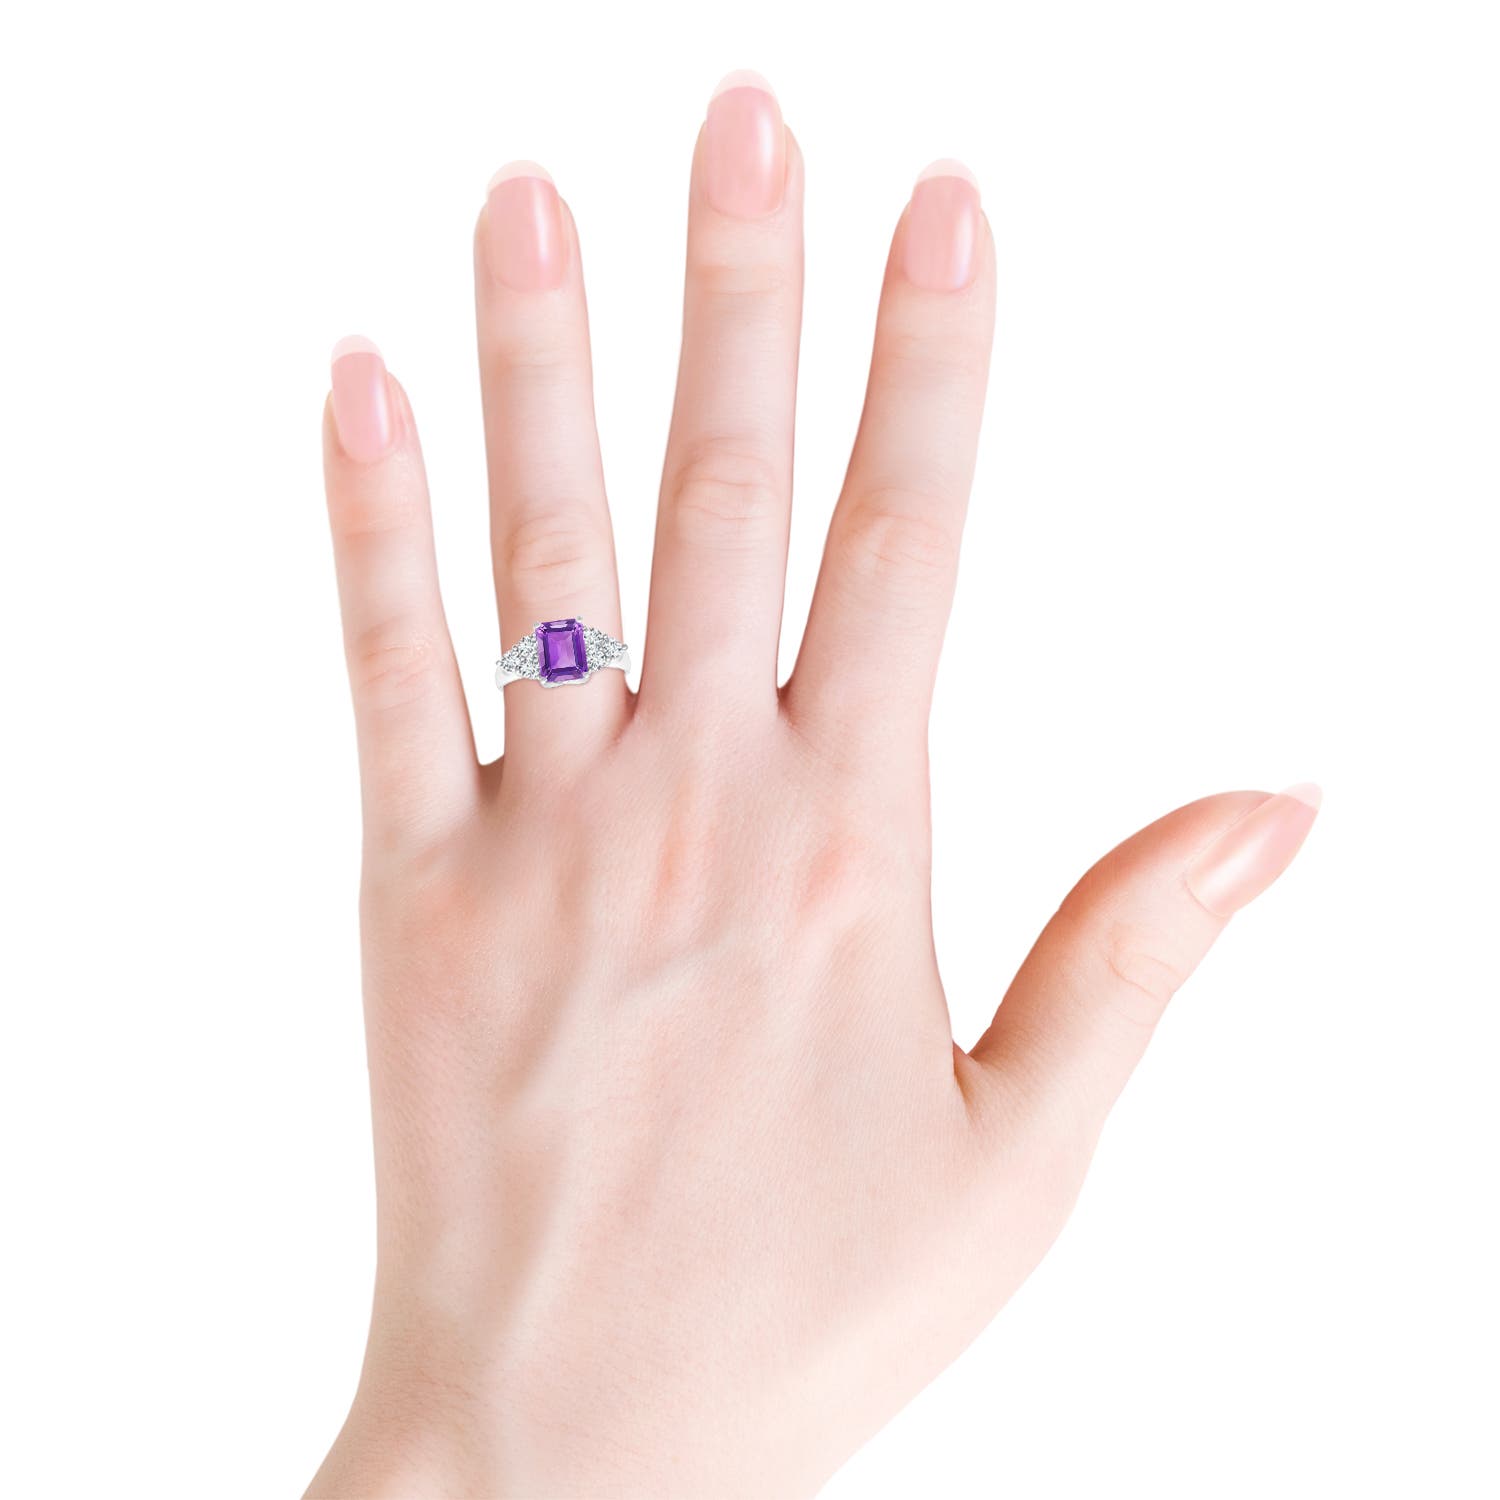 AA - Amethyst / 2.13 CT / 14 KT White Gold